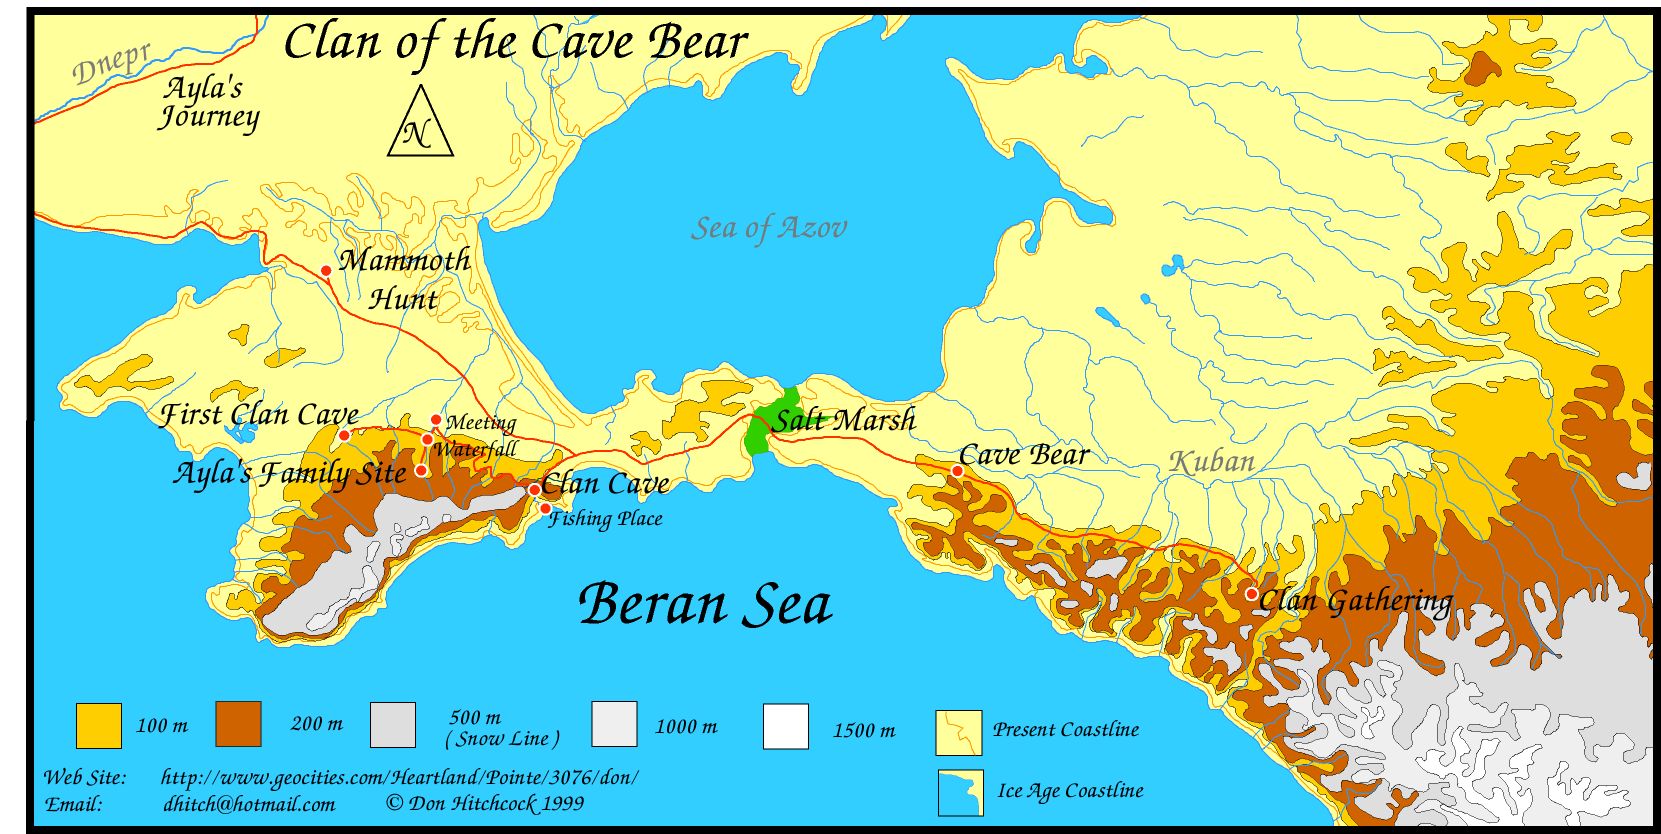 The Clan of the Cave Bear - Wikipedia